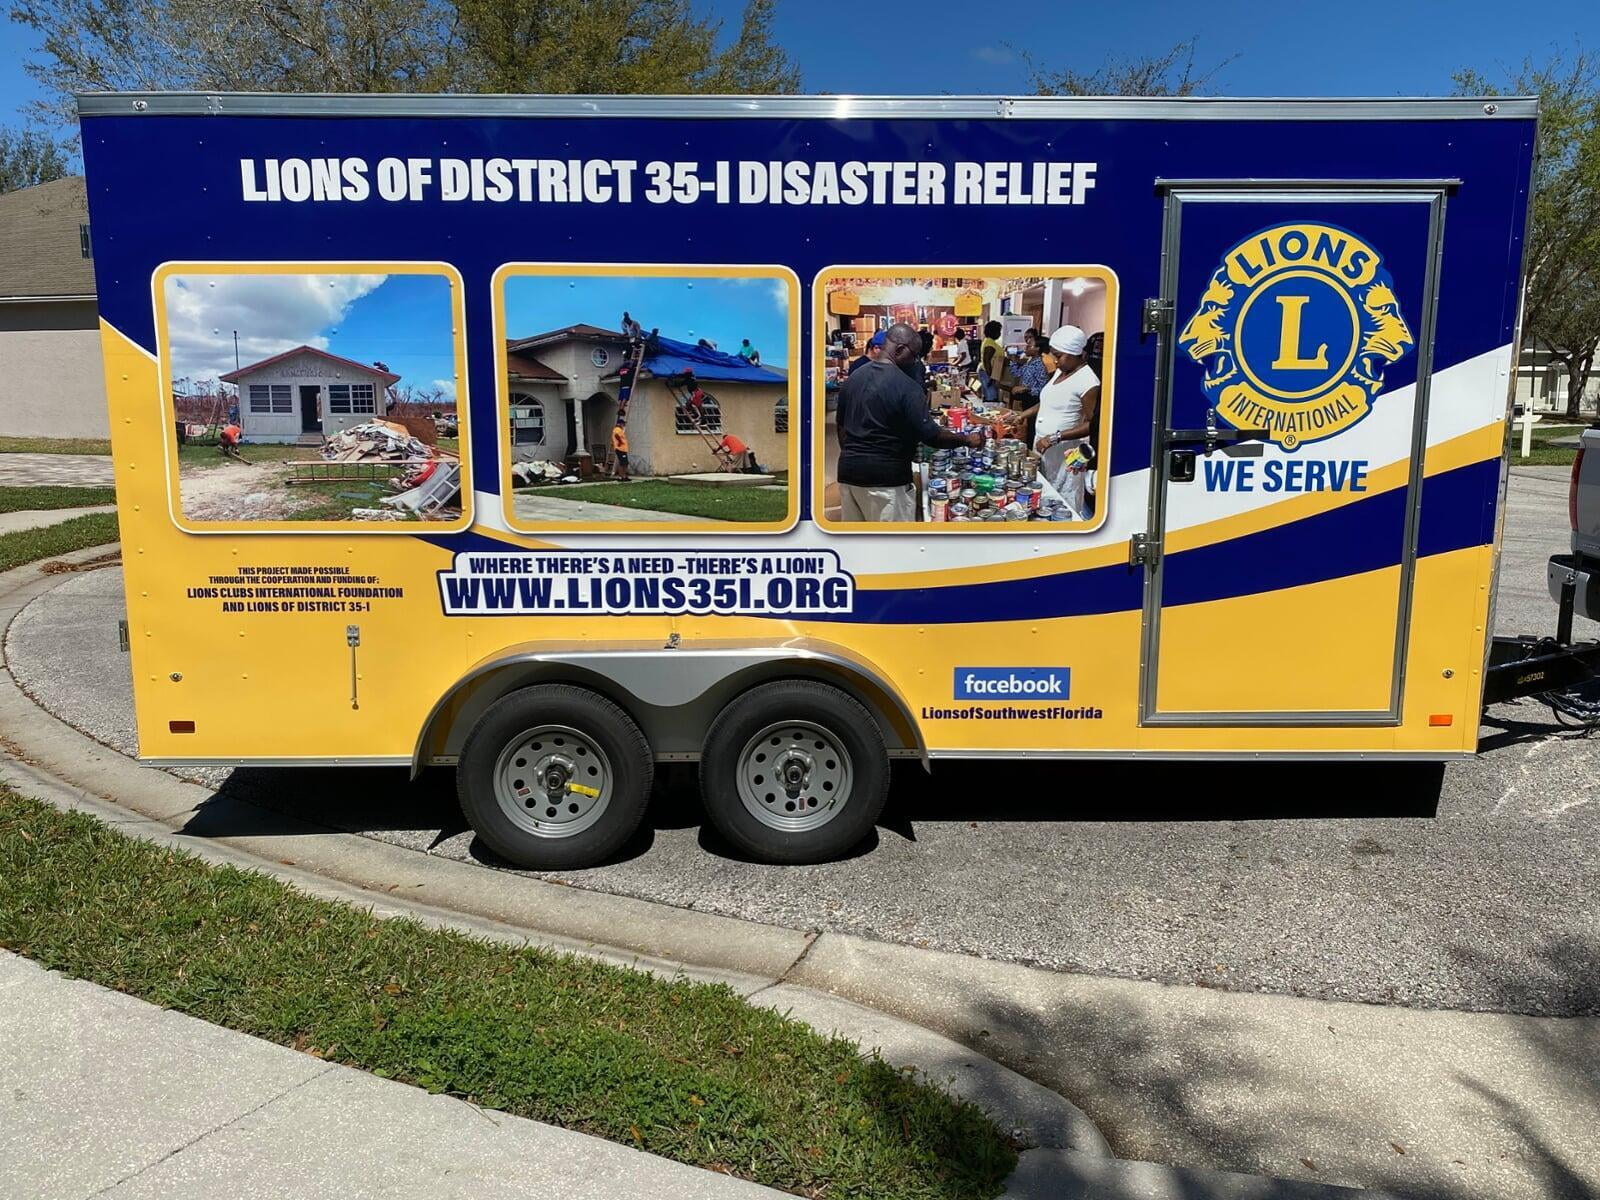 Life is unpredictable and the WC Lions are here to provide disaster relief to those in need. 